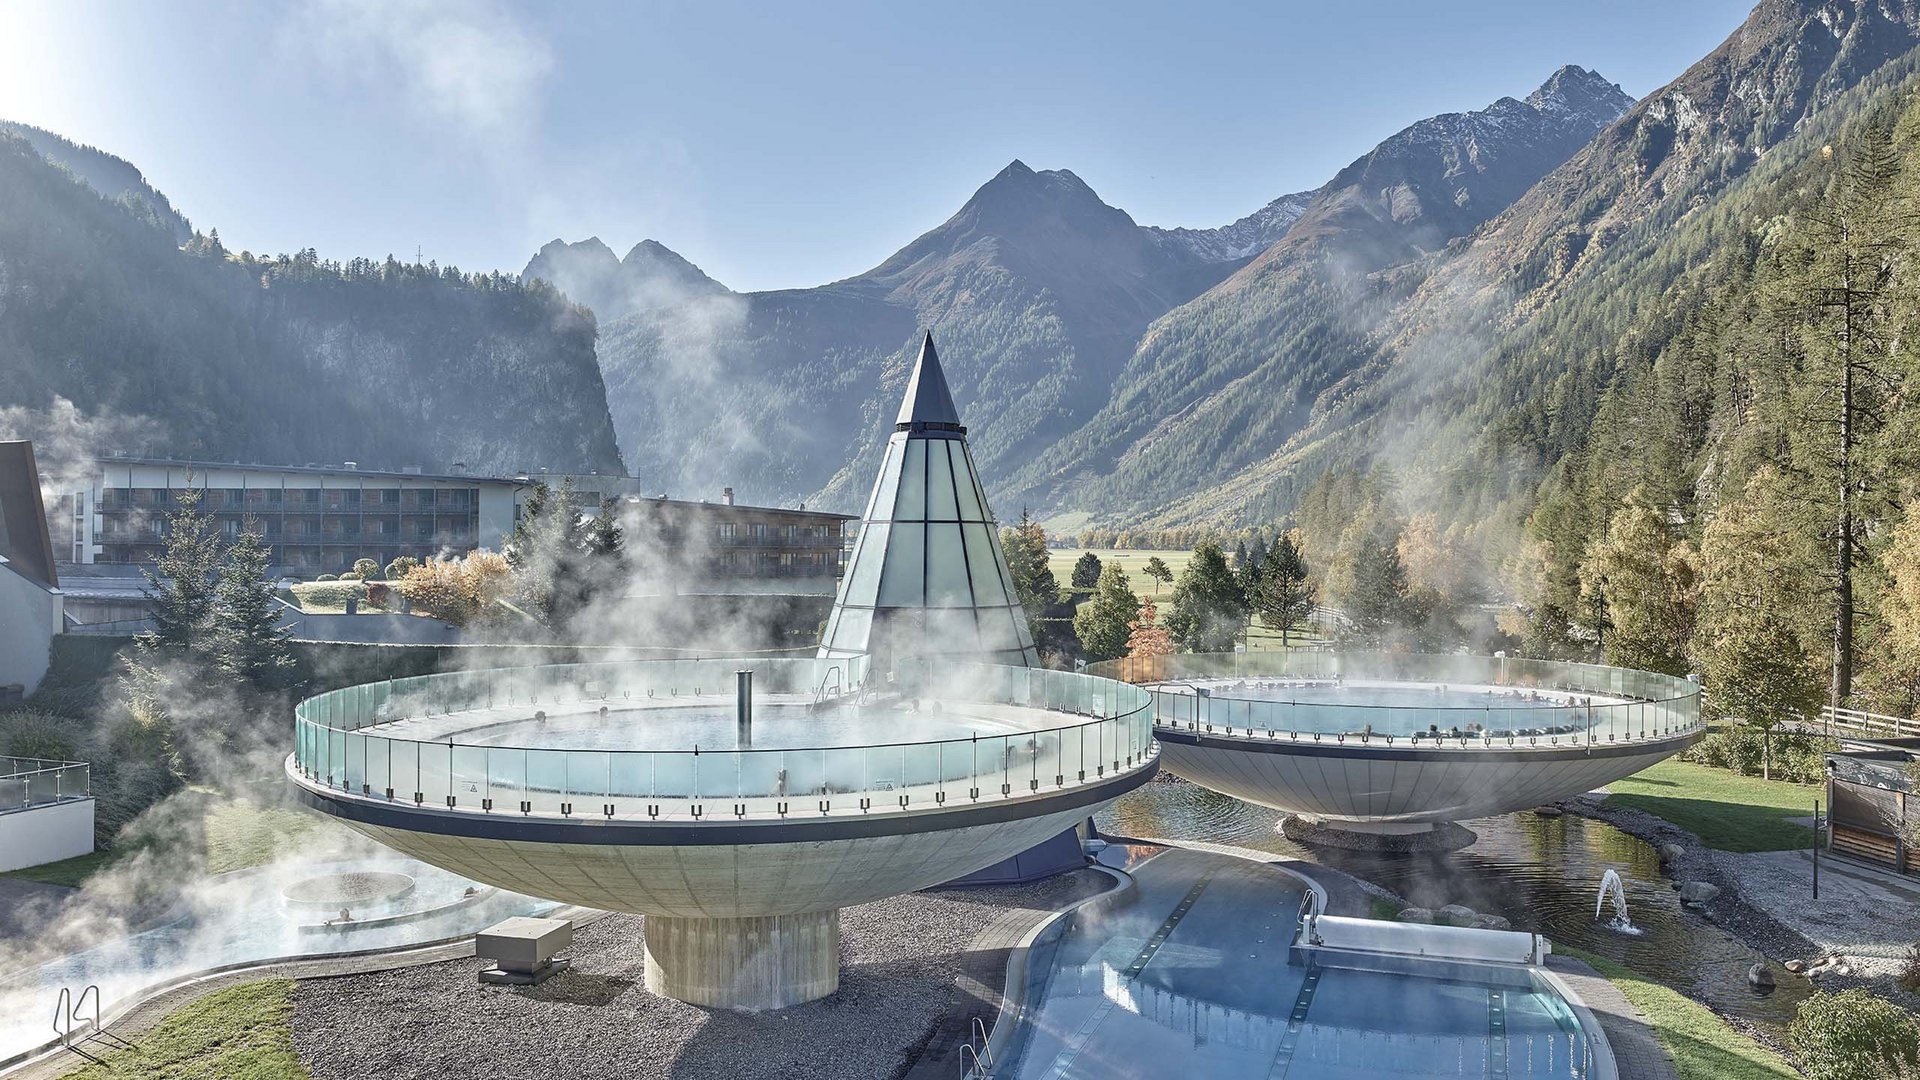 Natur- & Alpinhotel Post: sights and attractions in Ötztal